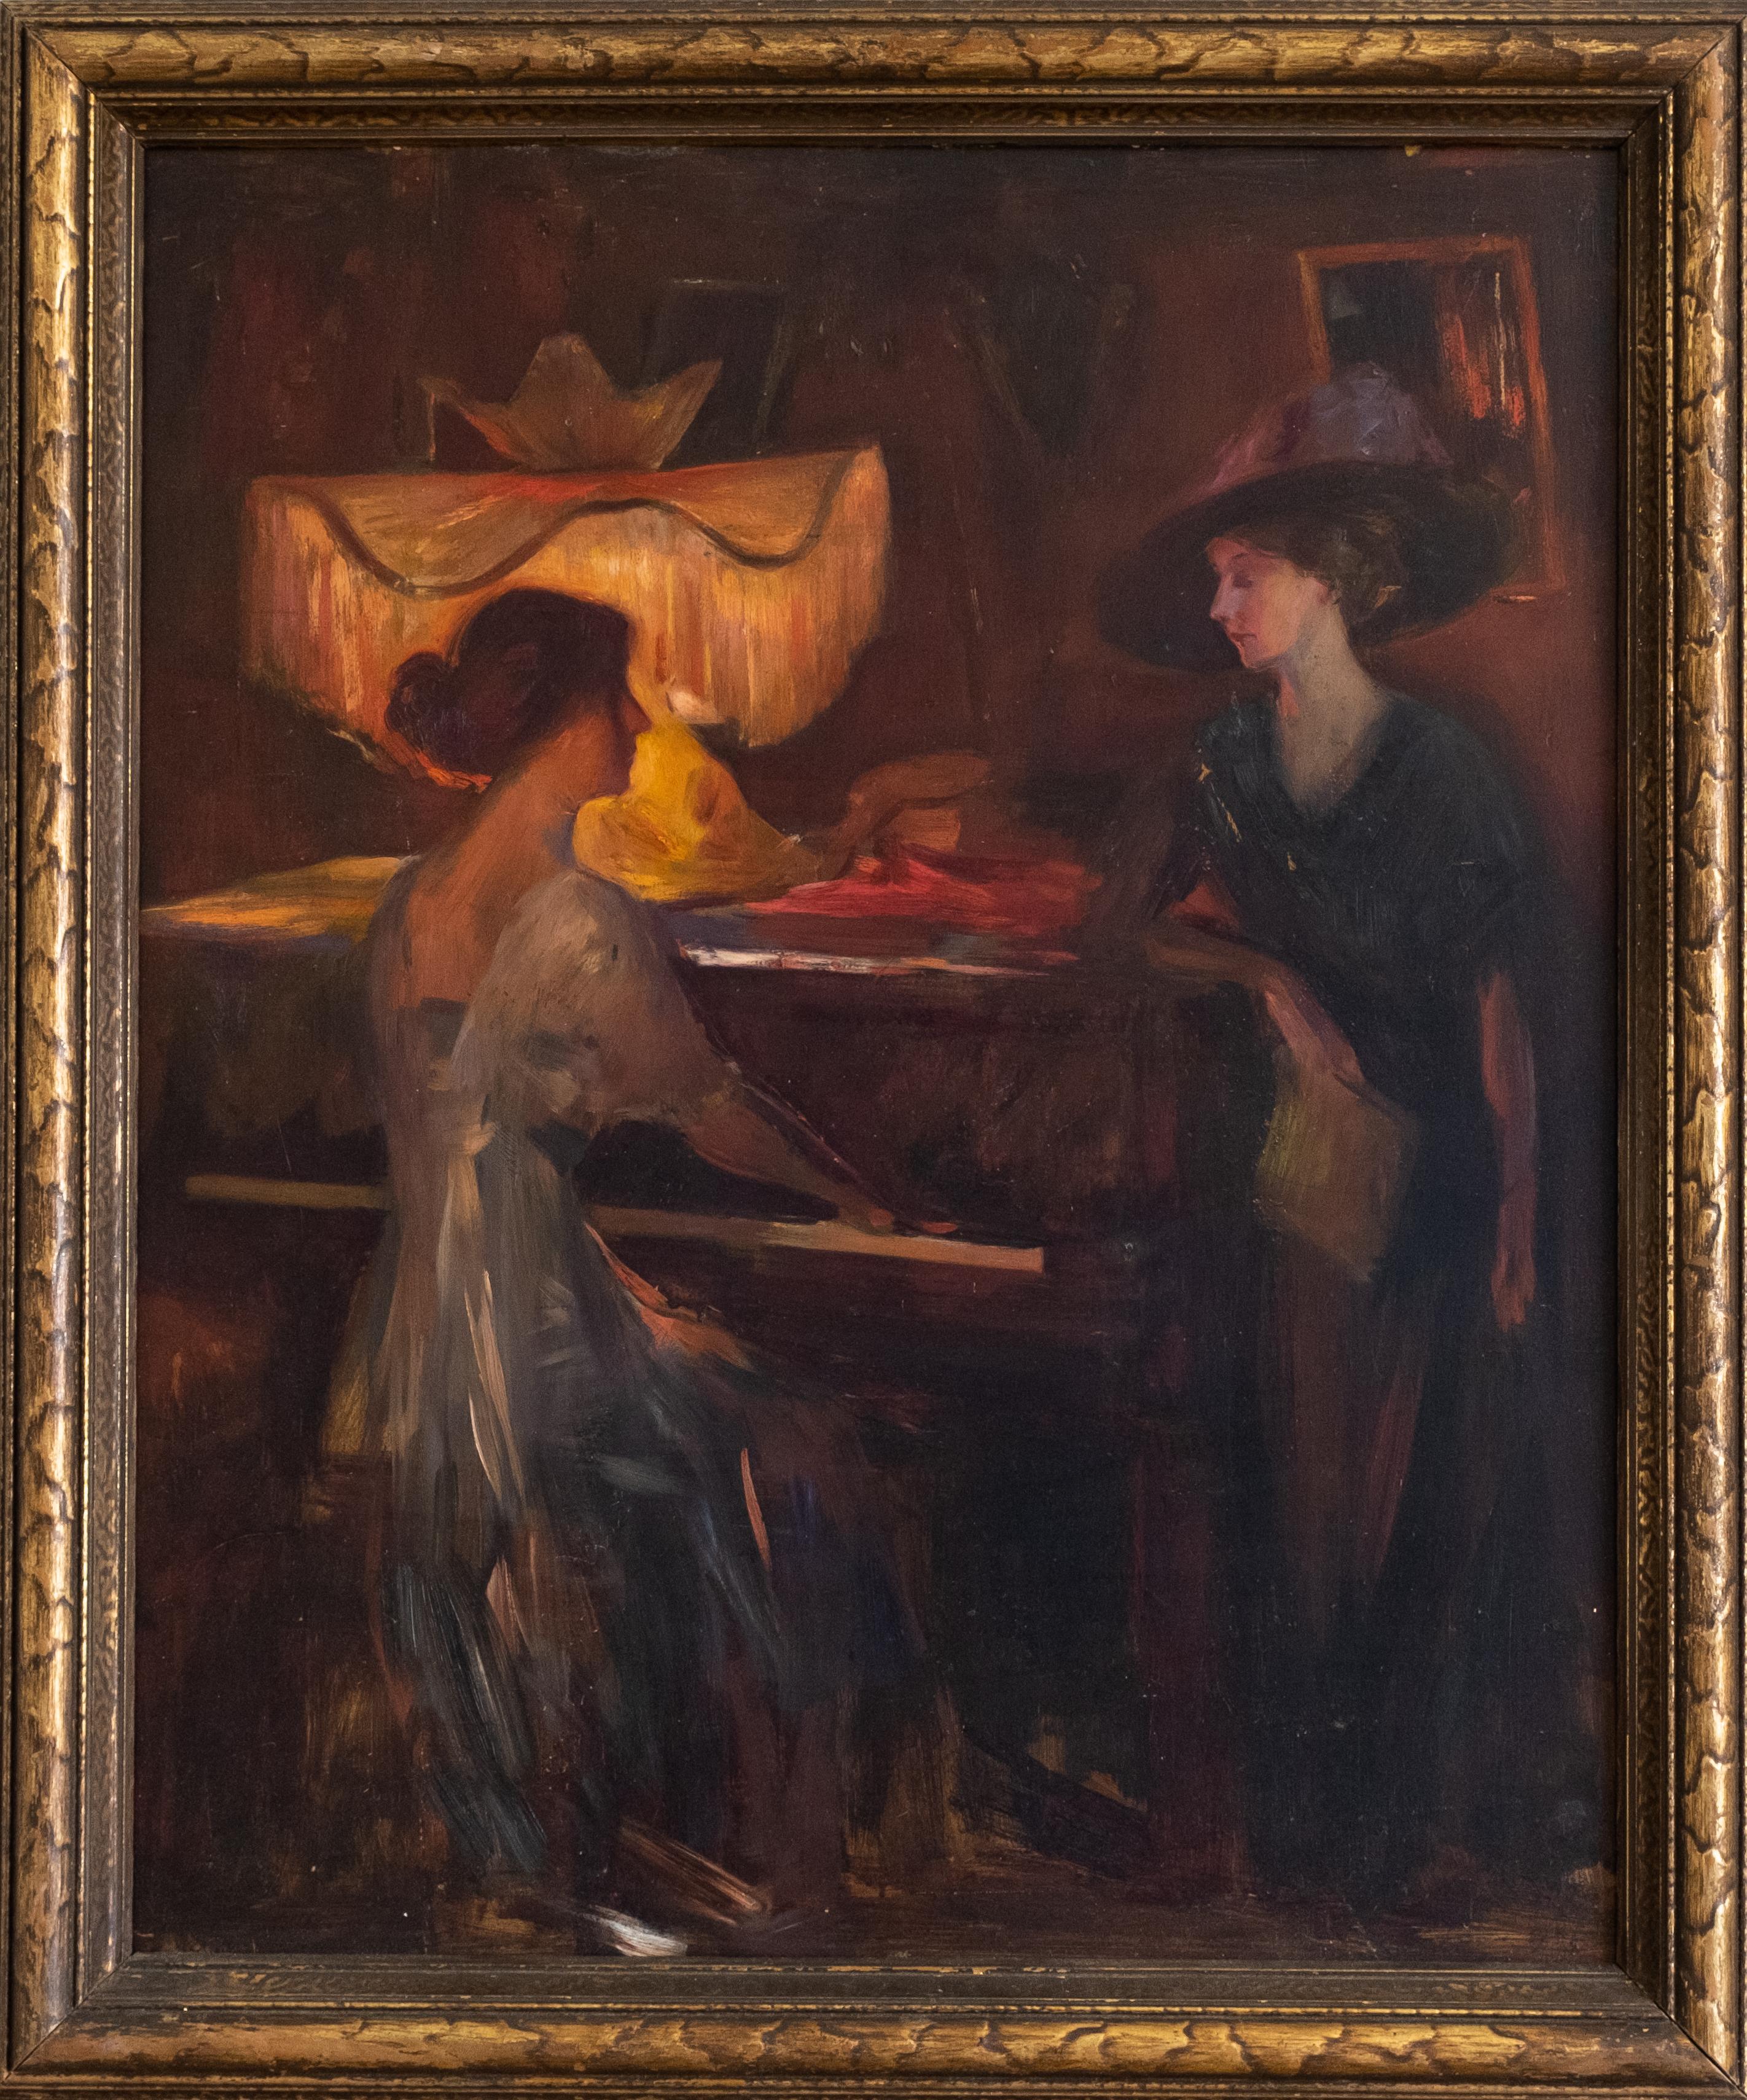 Emil Fuchs  (Austrian/American,1866- 1929). 'Interior with Two Figures'. American impressionist, oil painting on wood panel, having brooklyn museum provenance. Depicting two women in a music parlor. No apparent signature. Having two brooklyn museum